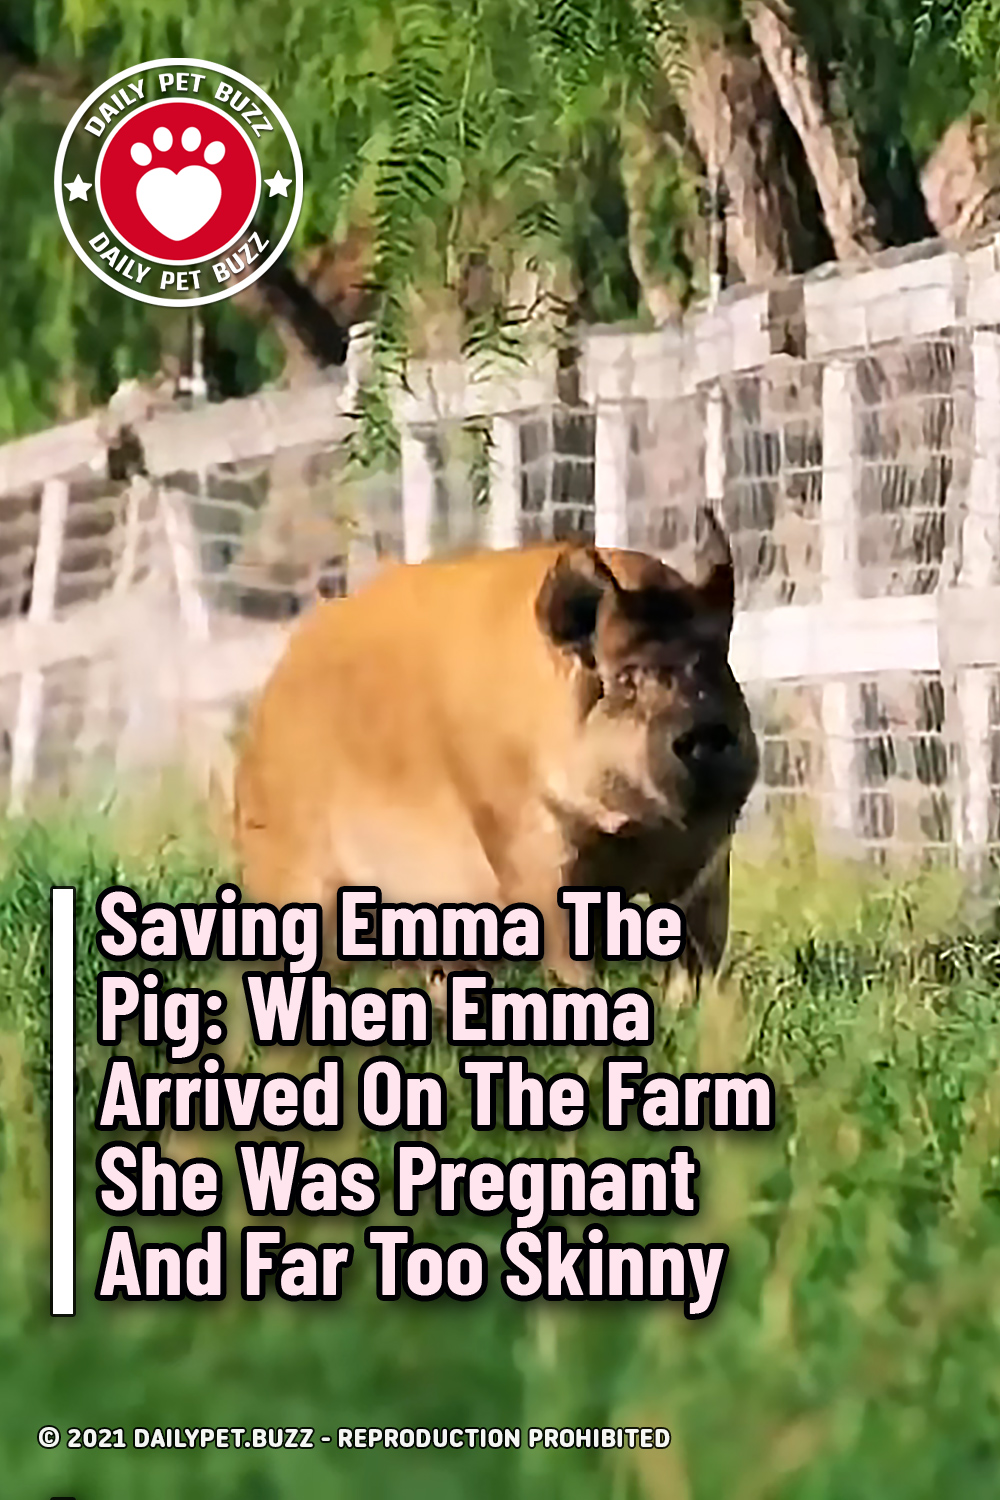 Saving Emma The Pig: When Emma Arrived On The Farm She Was Pregnant And Far Too Skinny